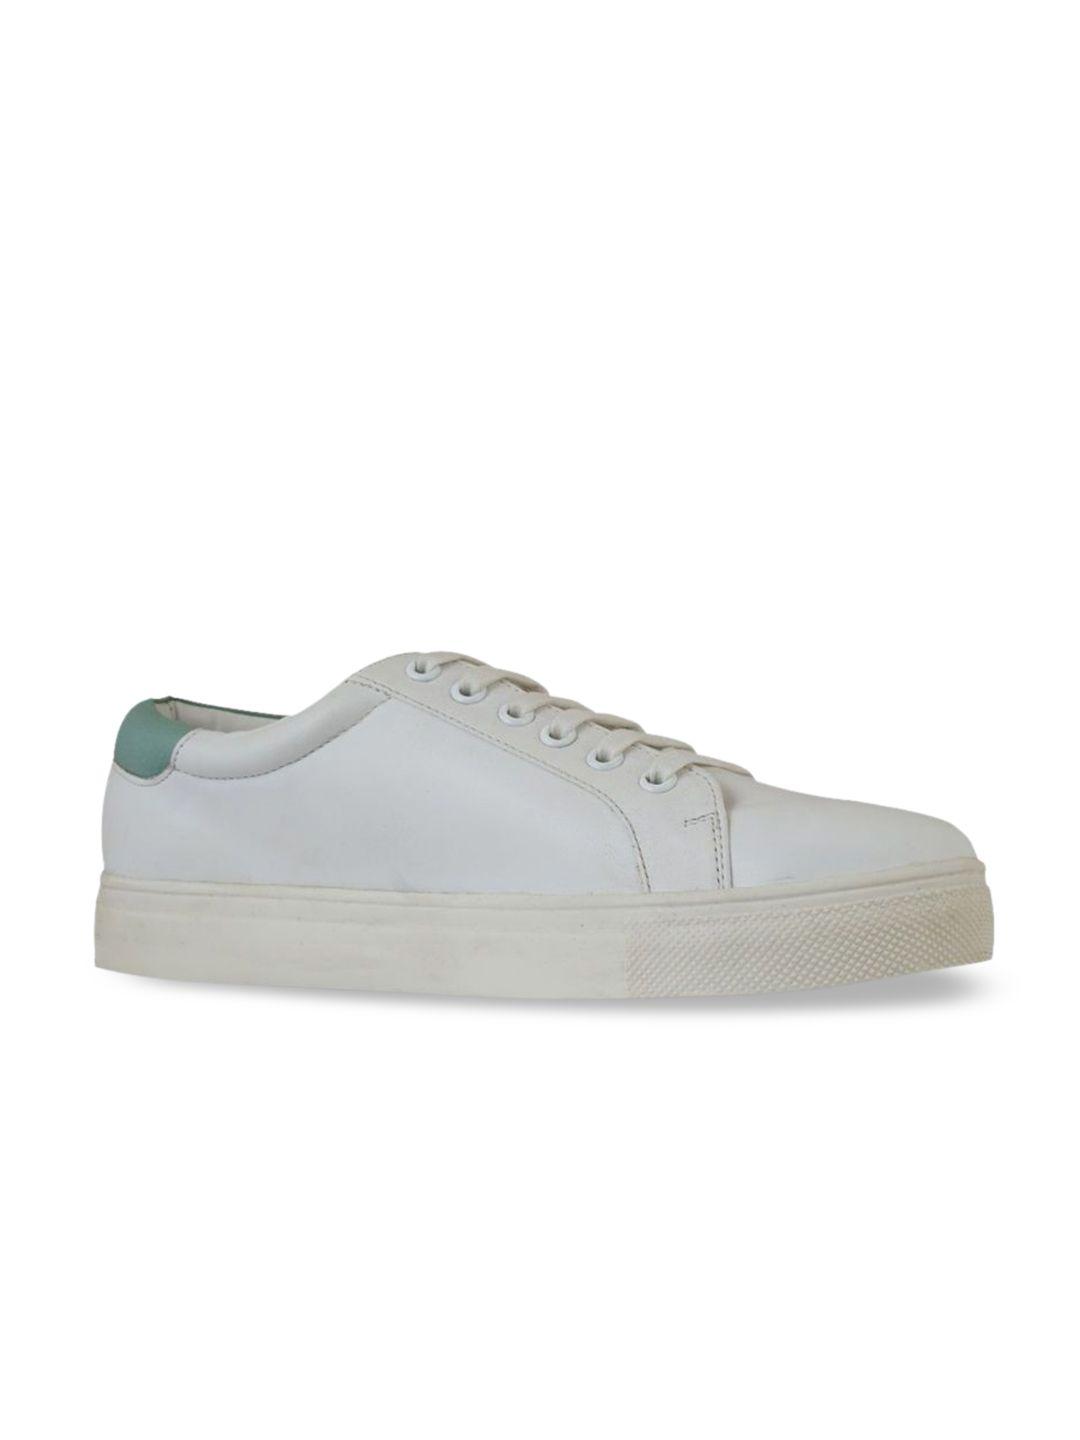 kenneth-cole-women-off-white-leather-sneakers